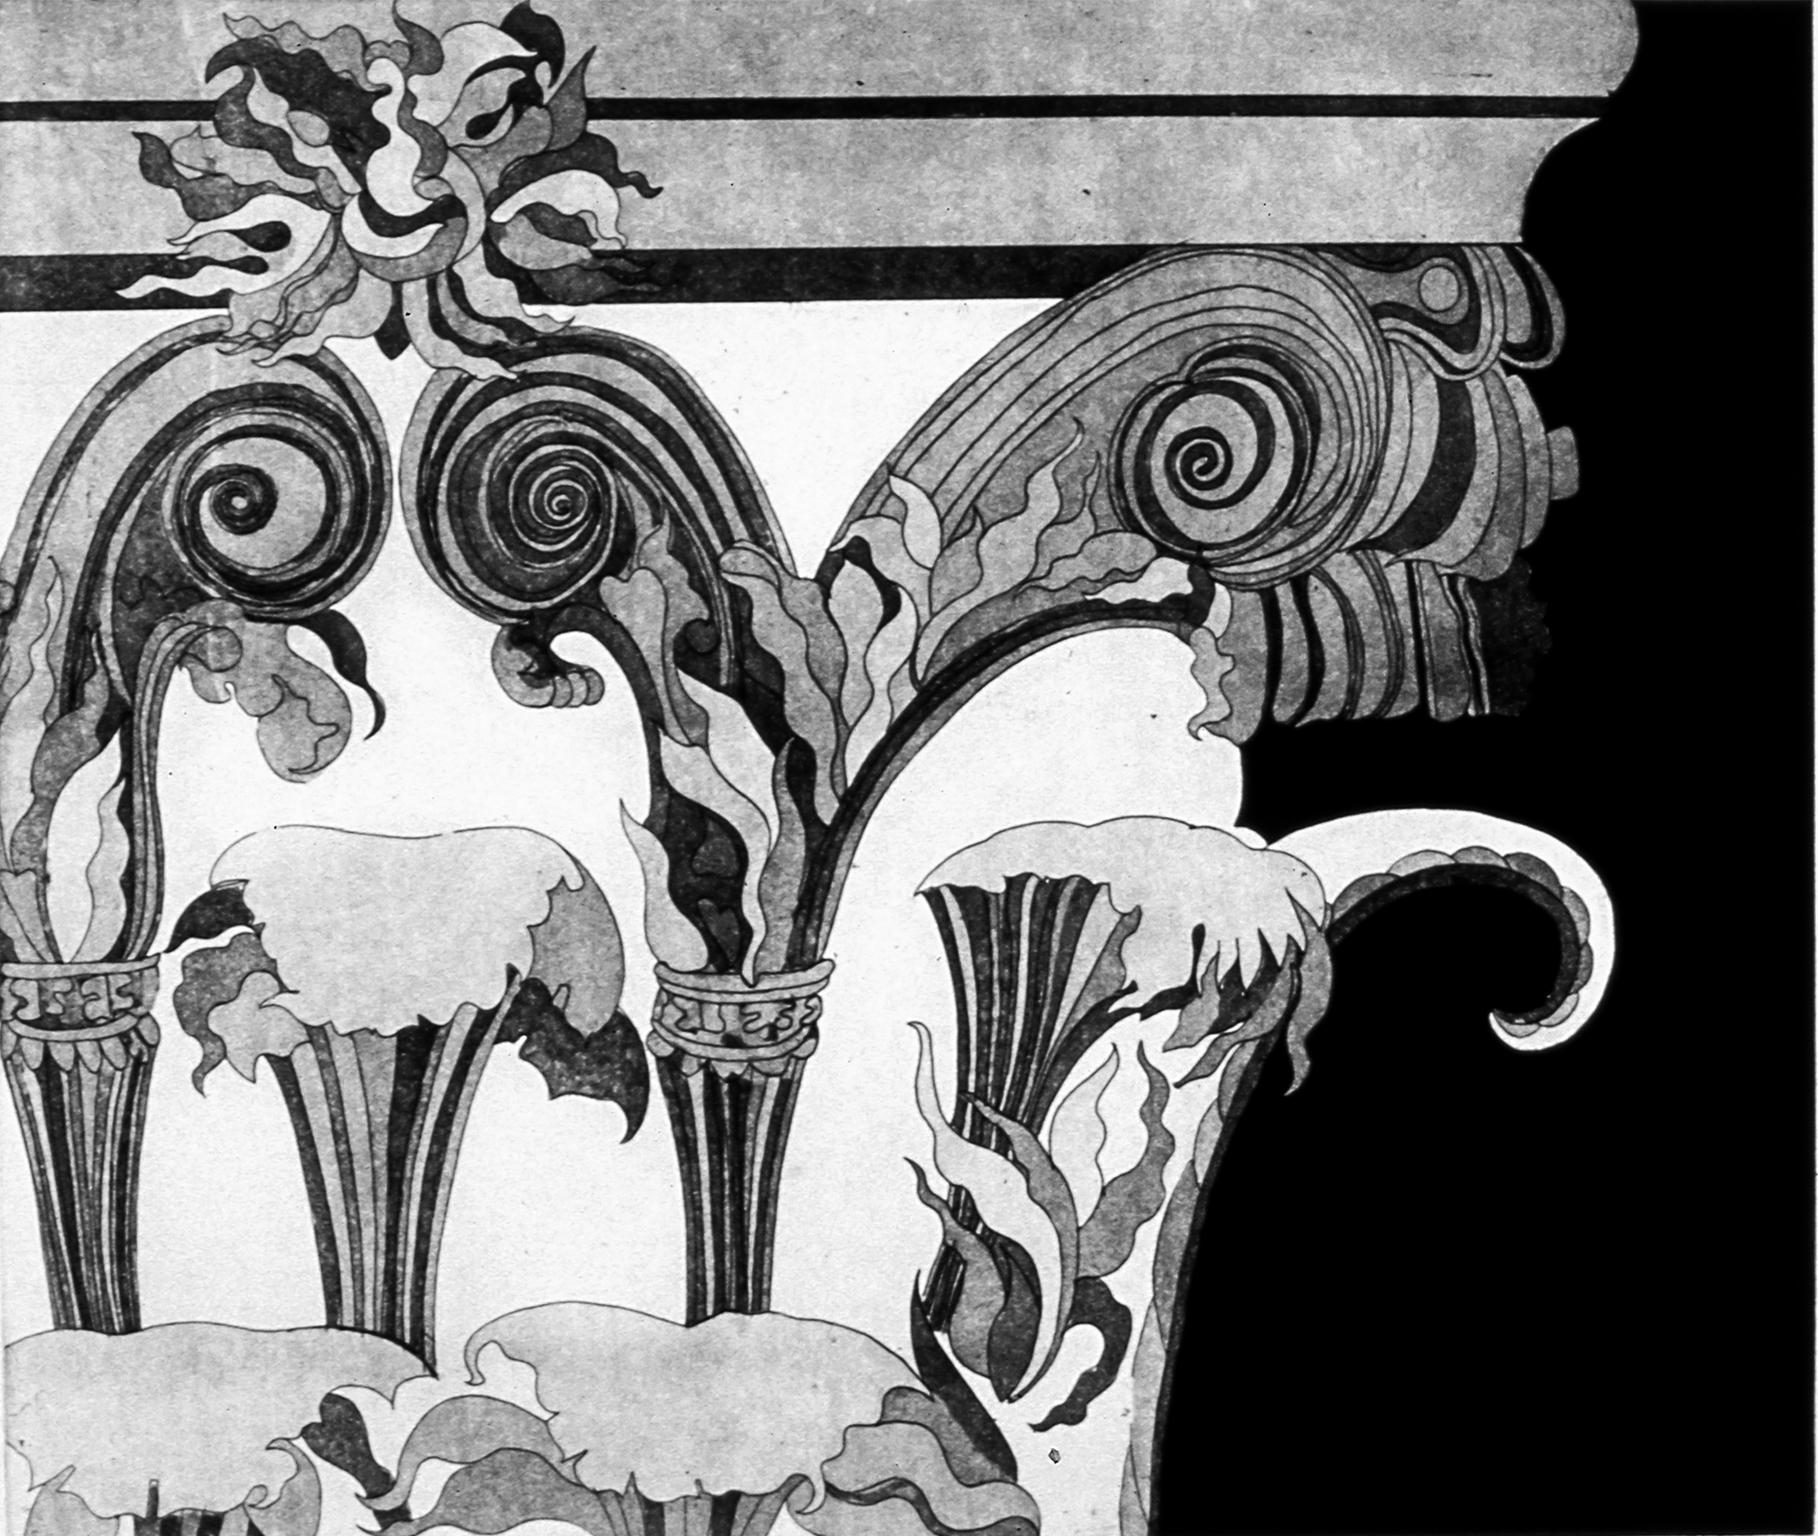 “Corinthian Capital Three”, black and white classic architectural detail print. - Contemporary Print by Adrianne Wortzel